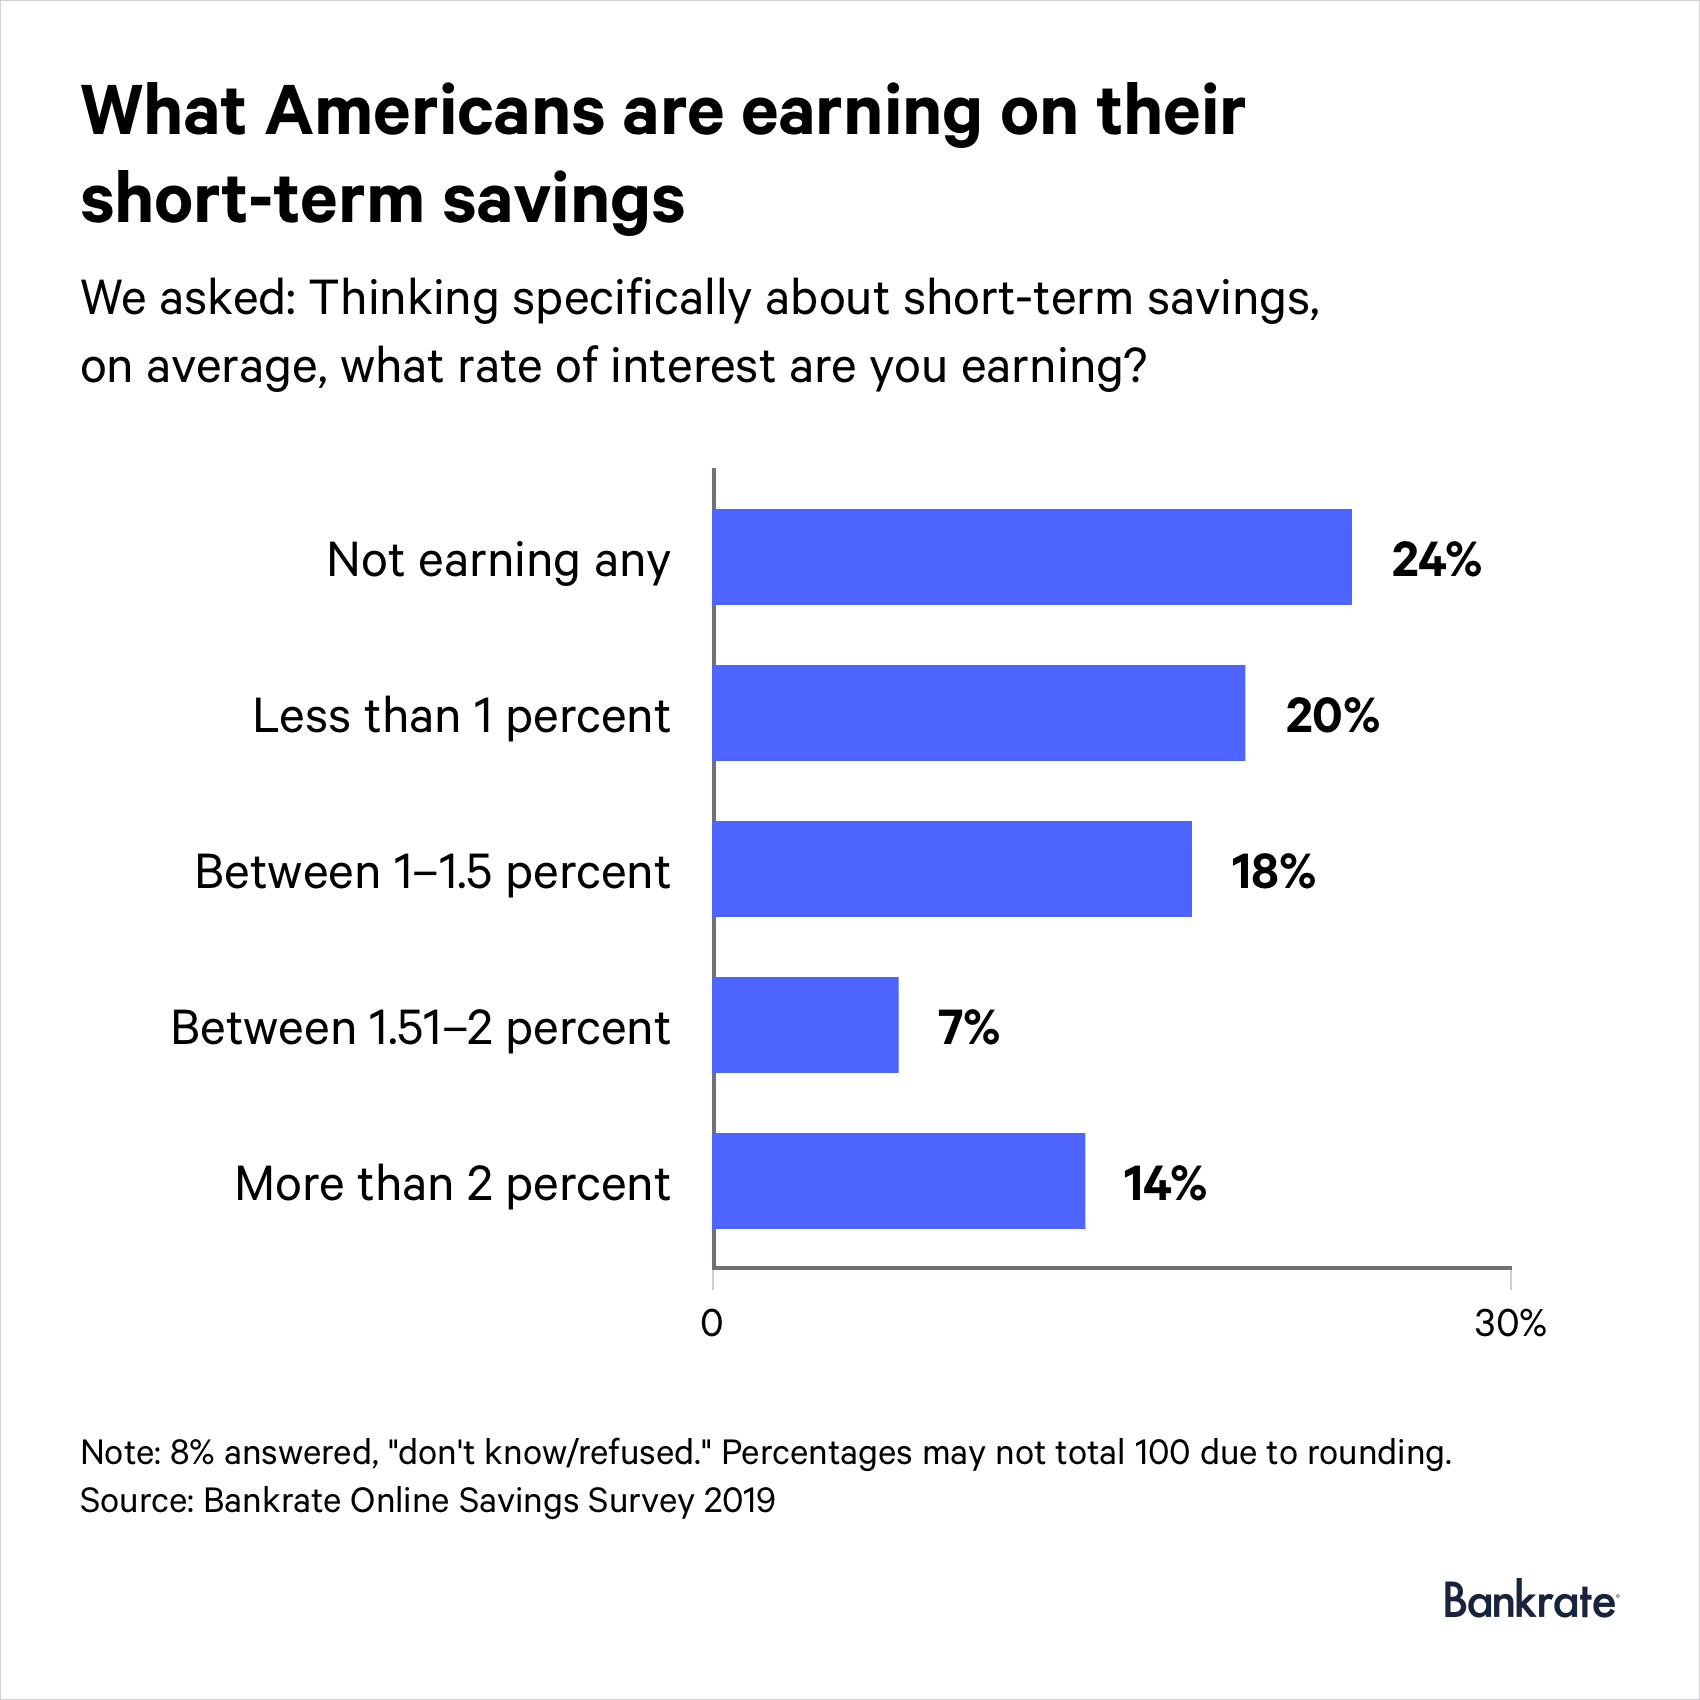 24% of respondents are not earning any interest